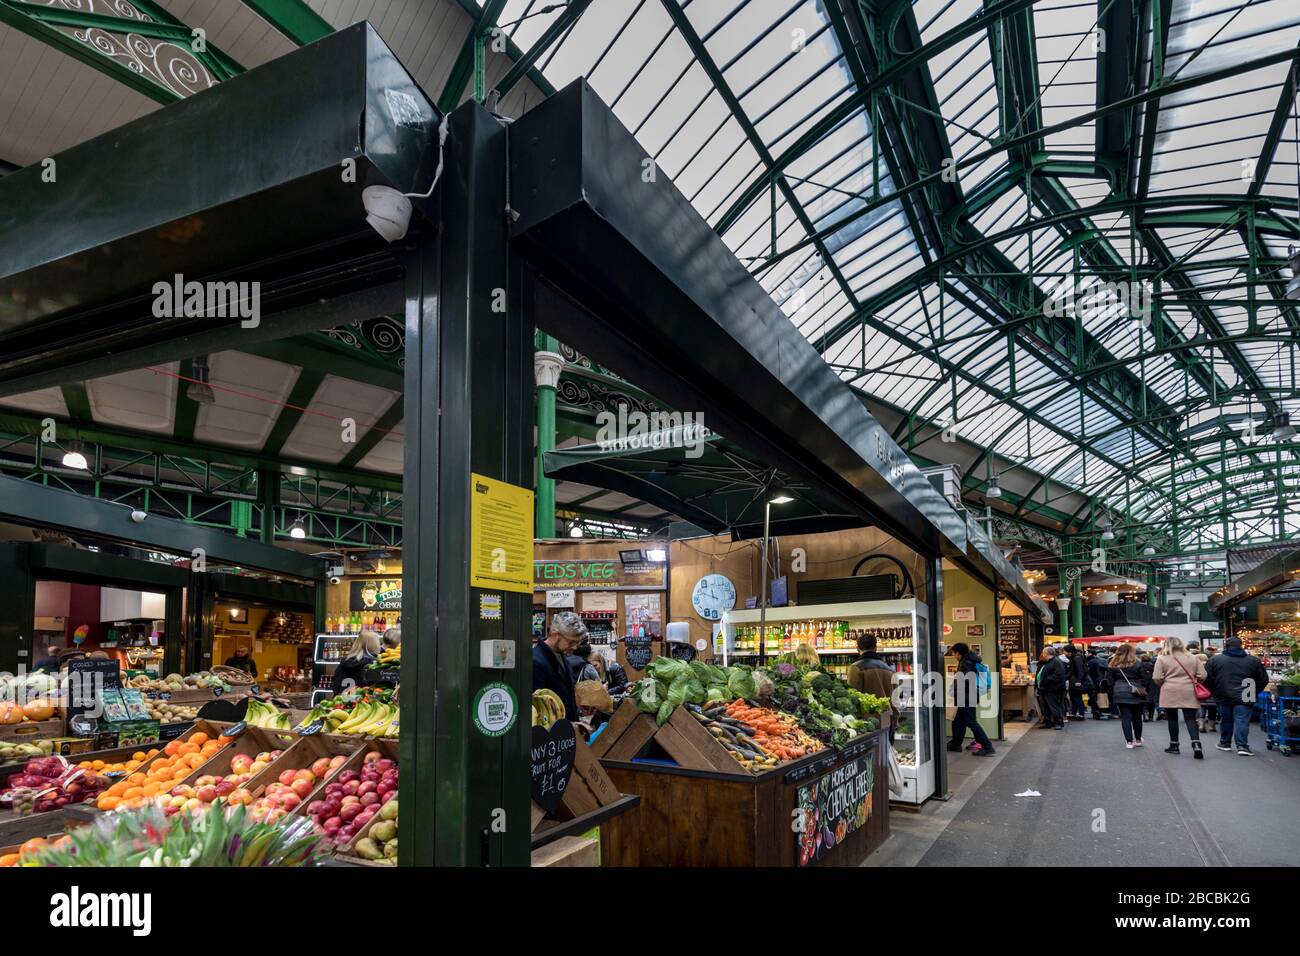 Vegetable stalls in Borough Market, Southwark, one of the largest and oldest food markets in London Stock Photo